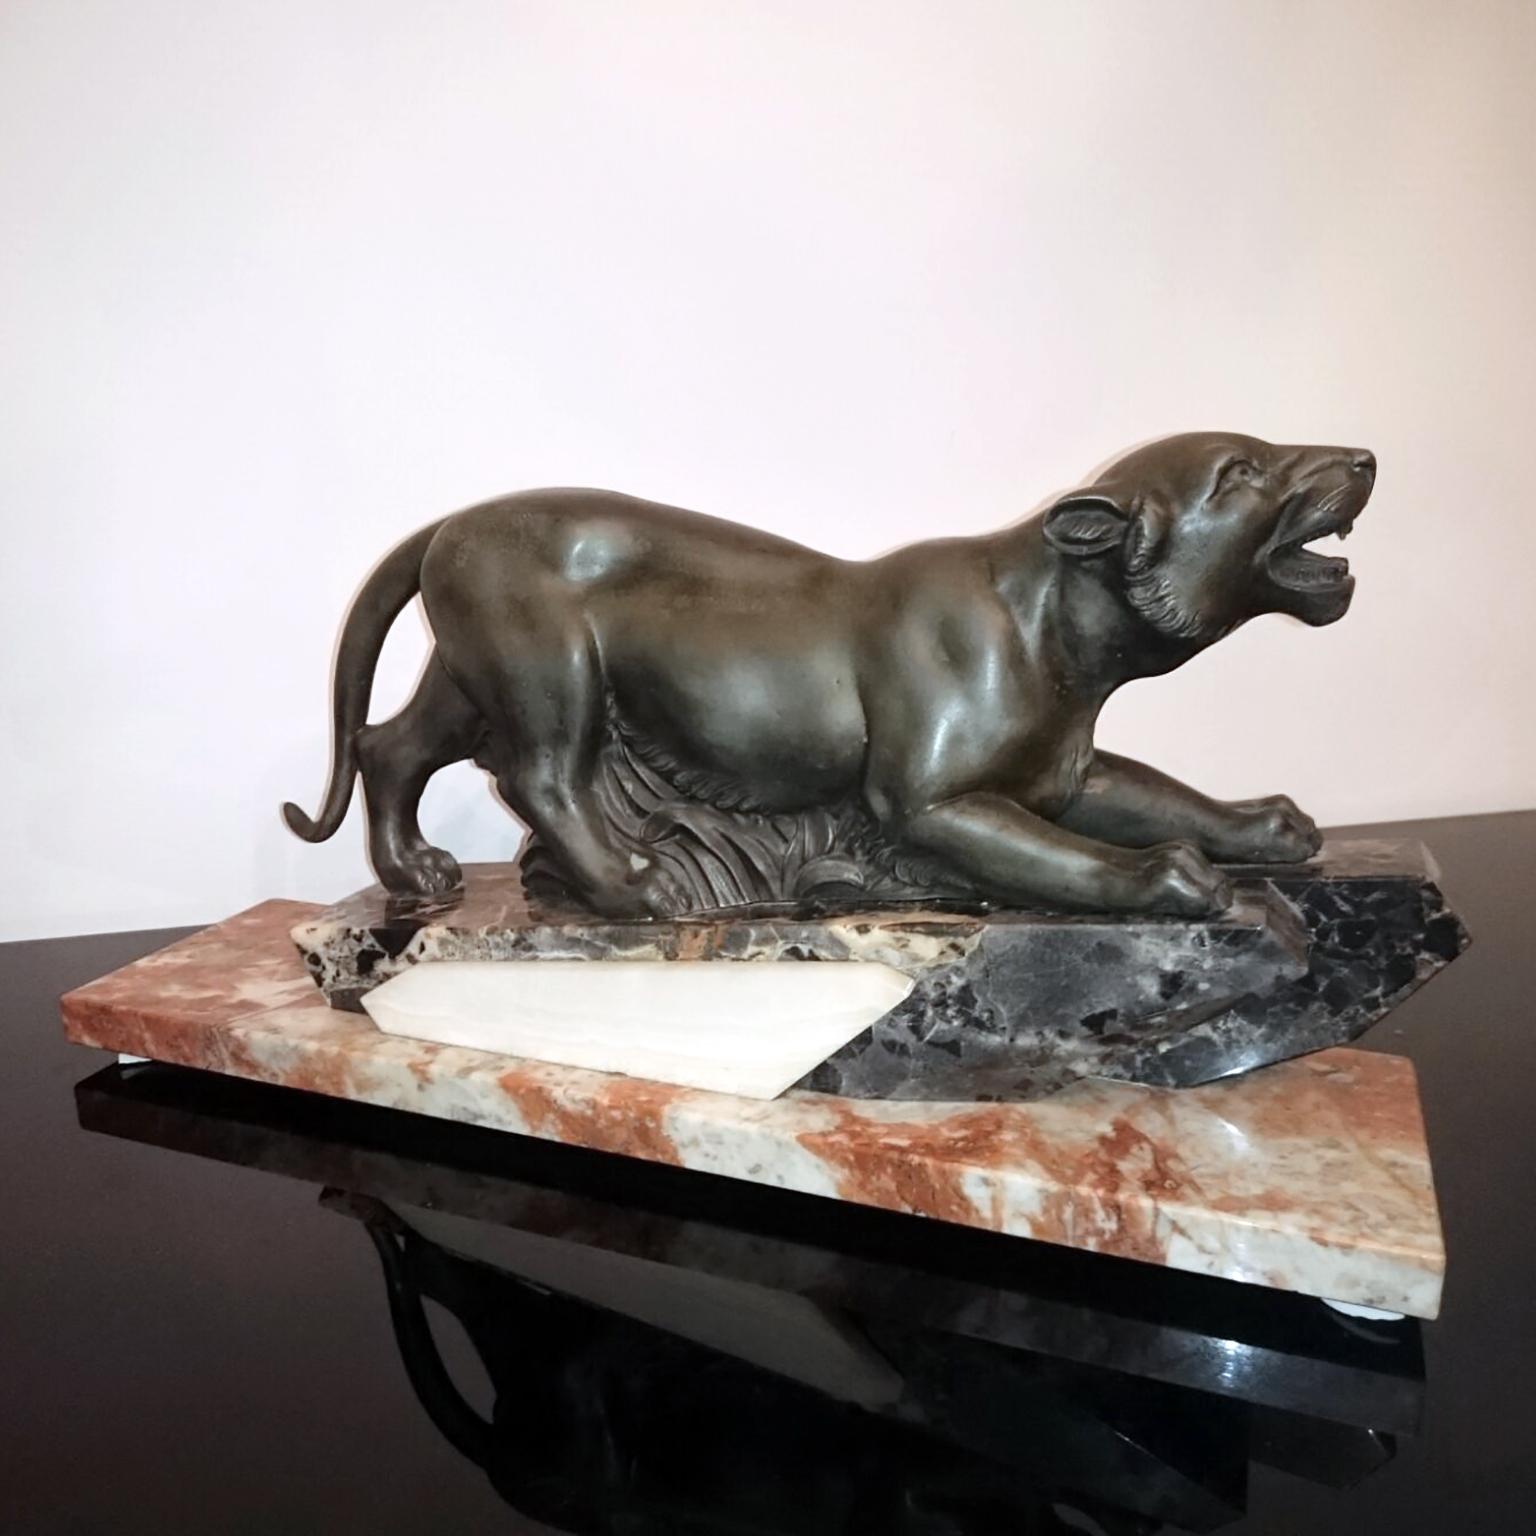 Art Deco sculpture depicting a stalking panther, France, circa 1930
Green patinated régule panther on a rectangular, profiled pedestal of white veined, black and red marble.

Dimensions:
Length 46cm (18.11 in.), depth 12cm (4.73 in.), height